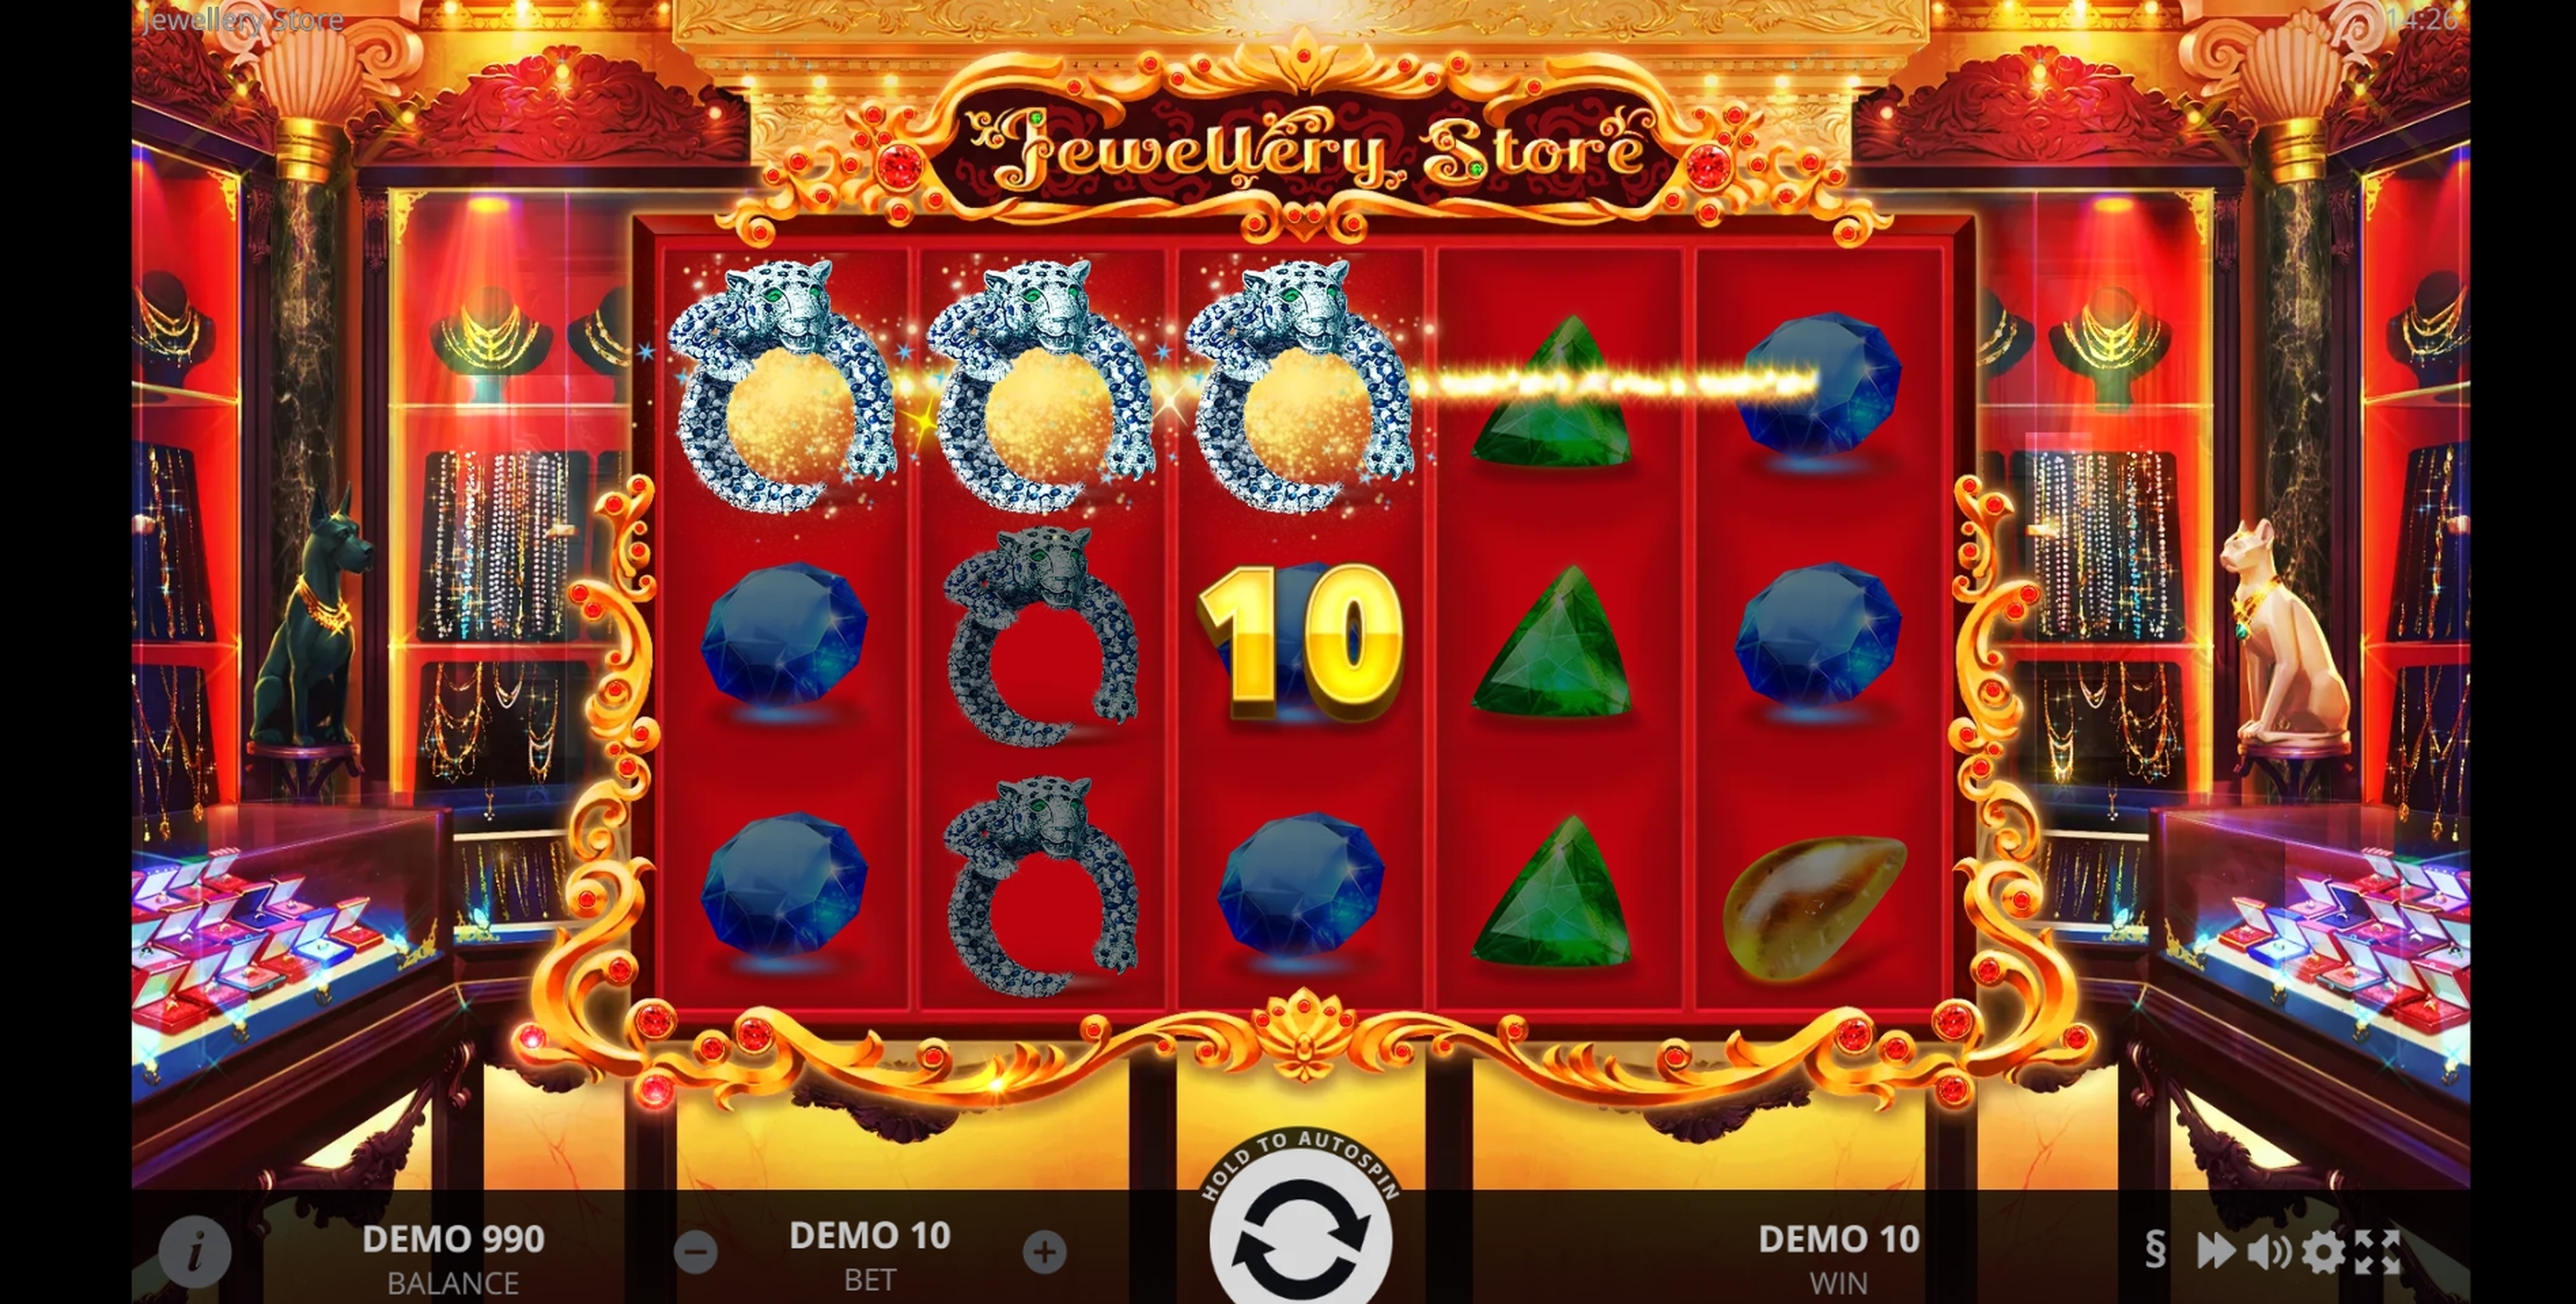 Win Money in Jewellery Store Free Slot Game by Evoplay Entertainment